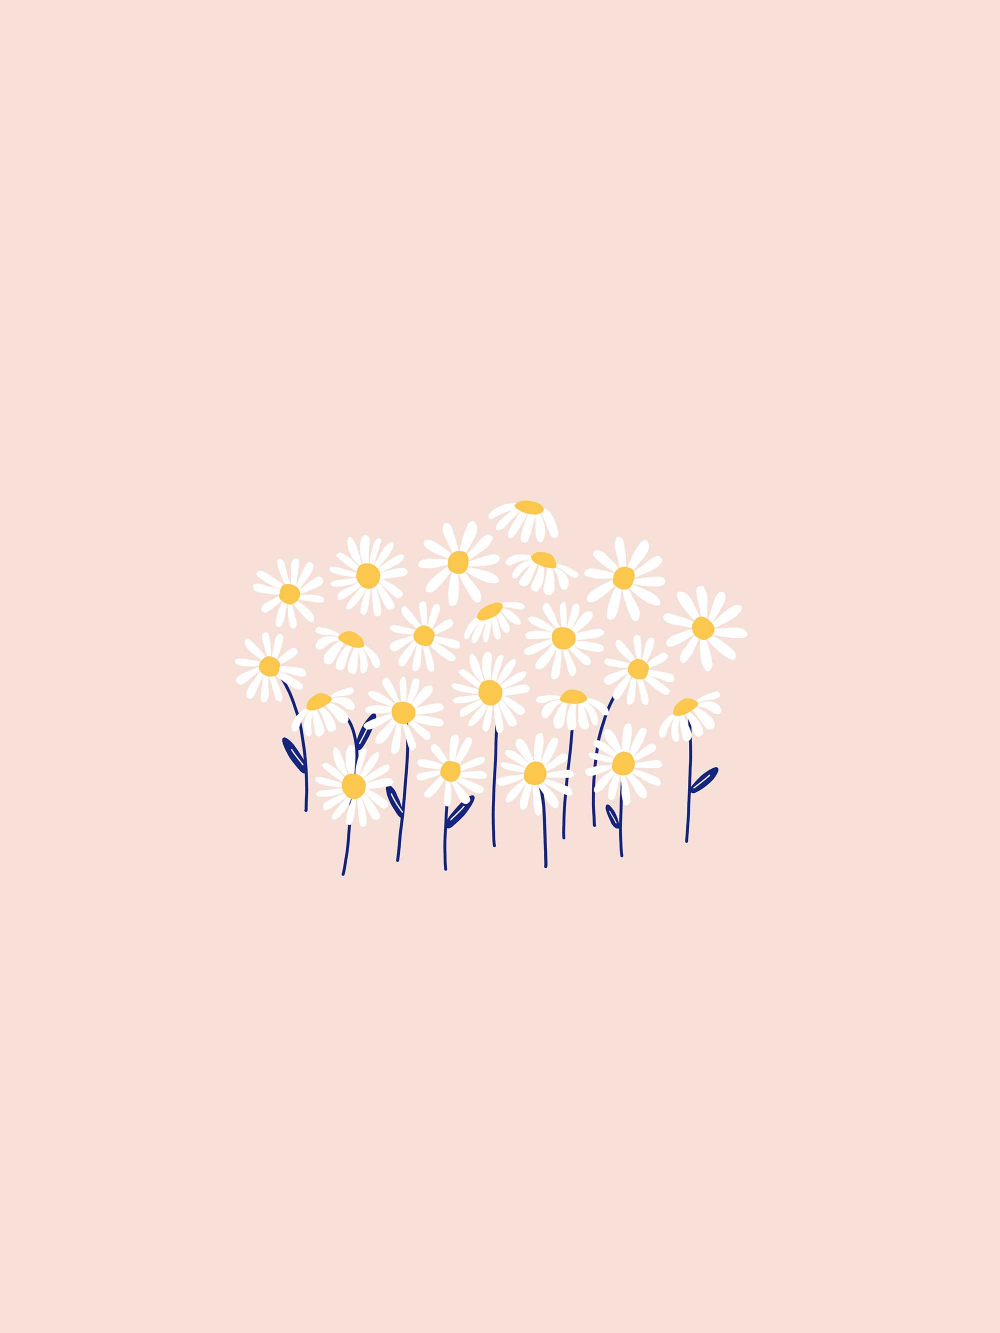 IPhone wallpaper with a field of daisies - Cute